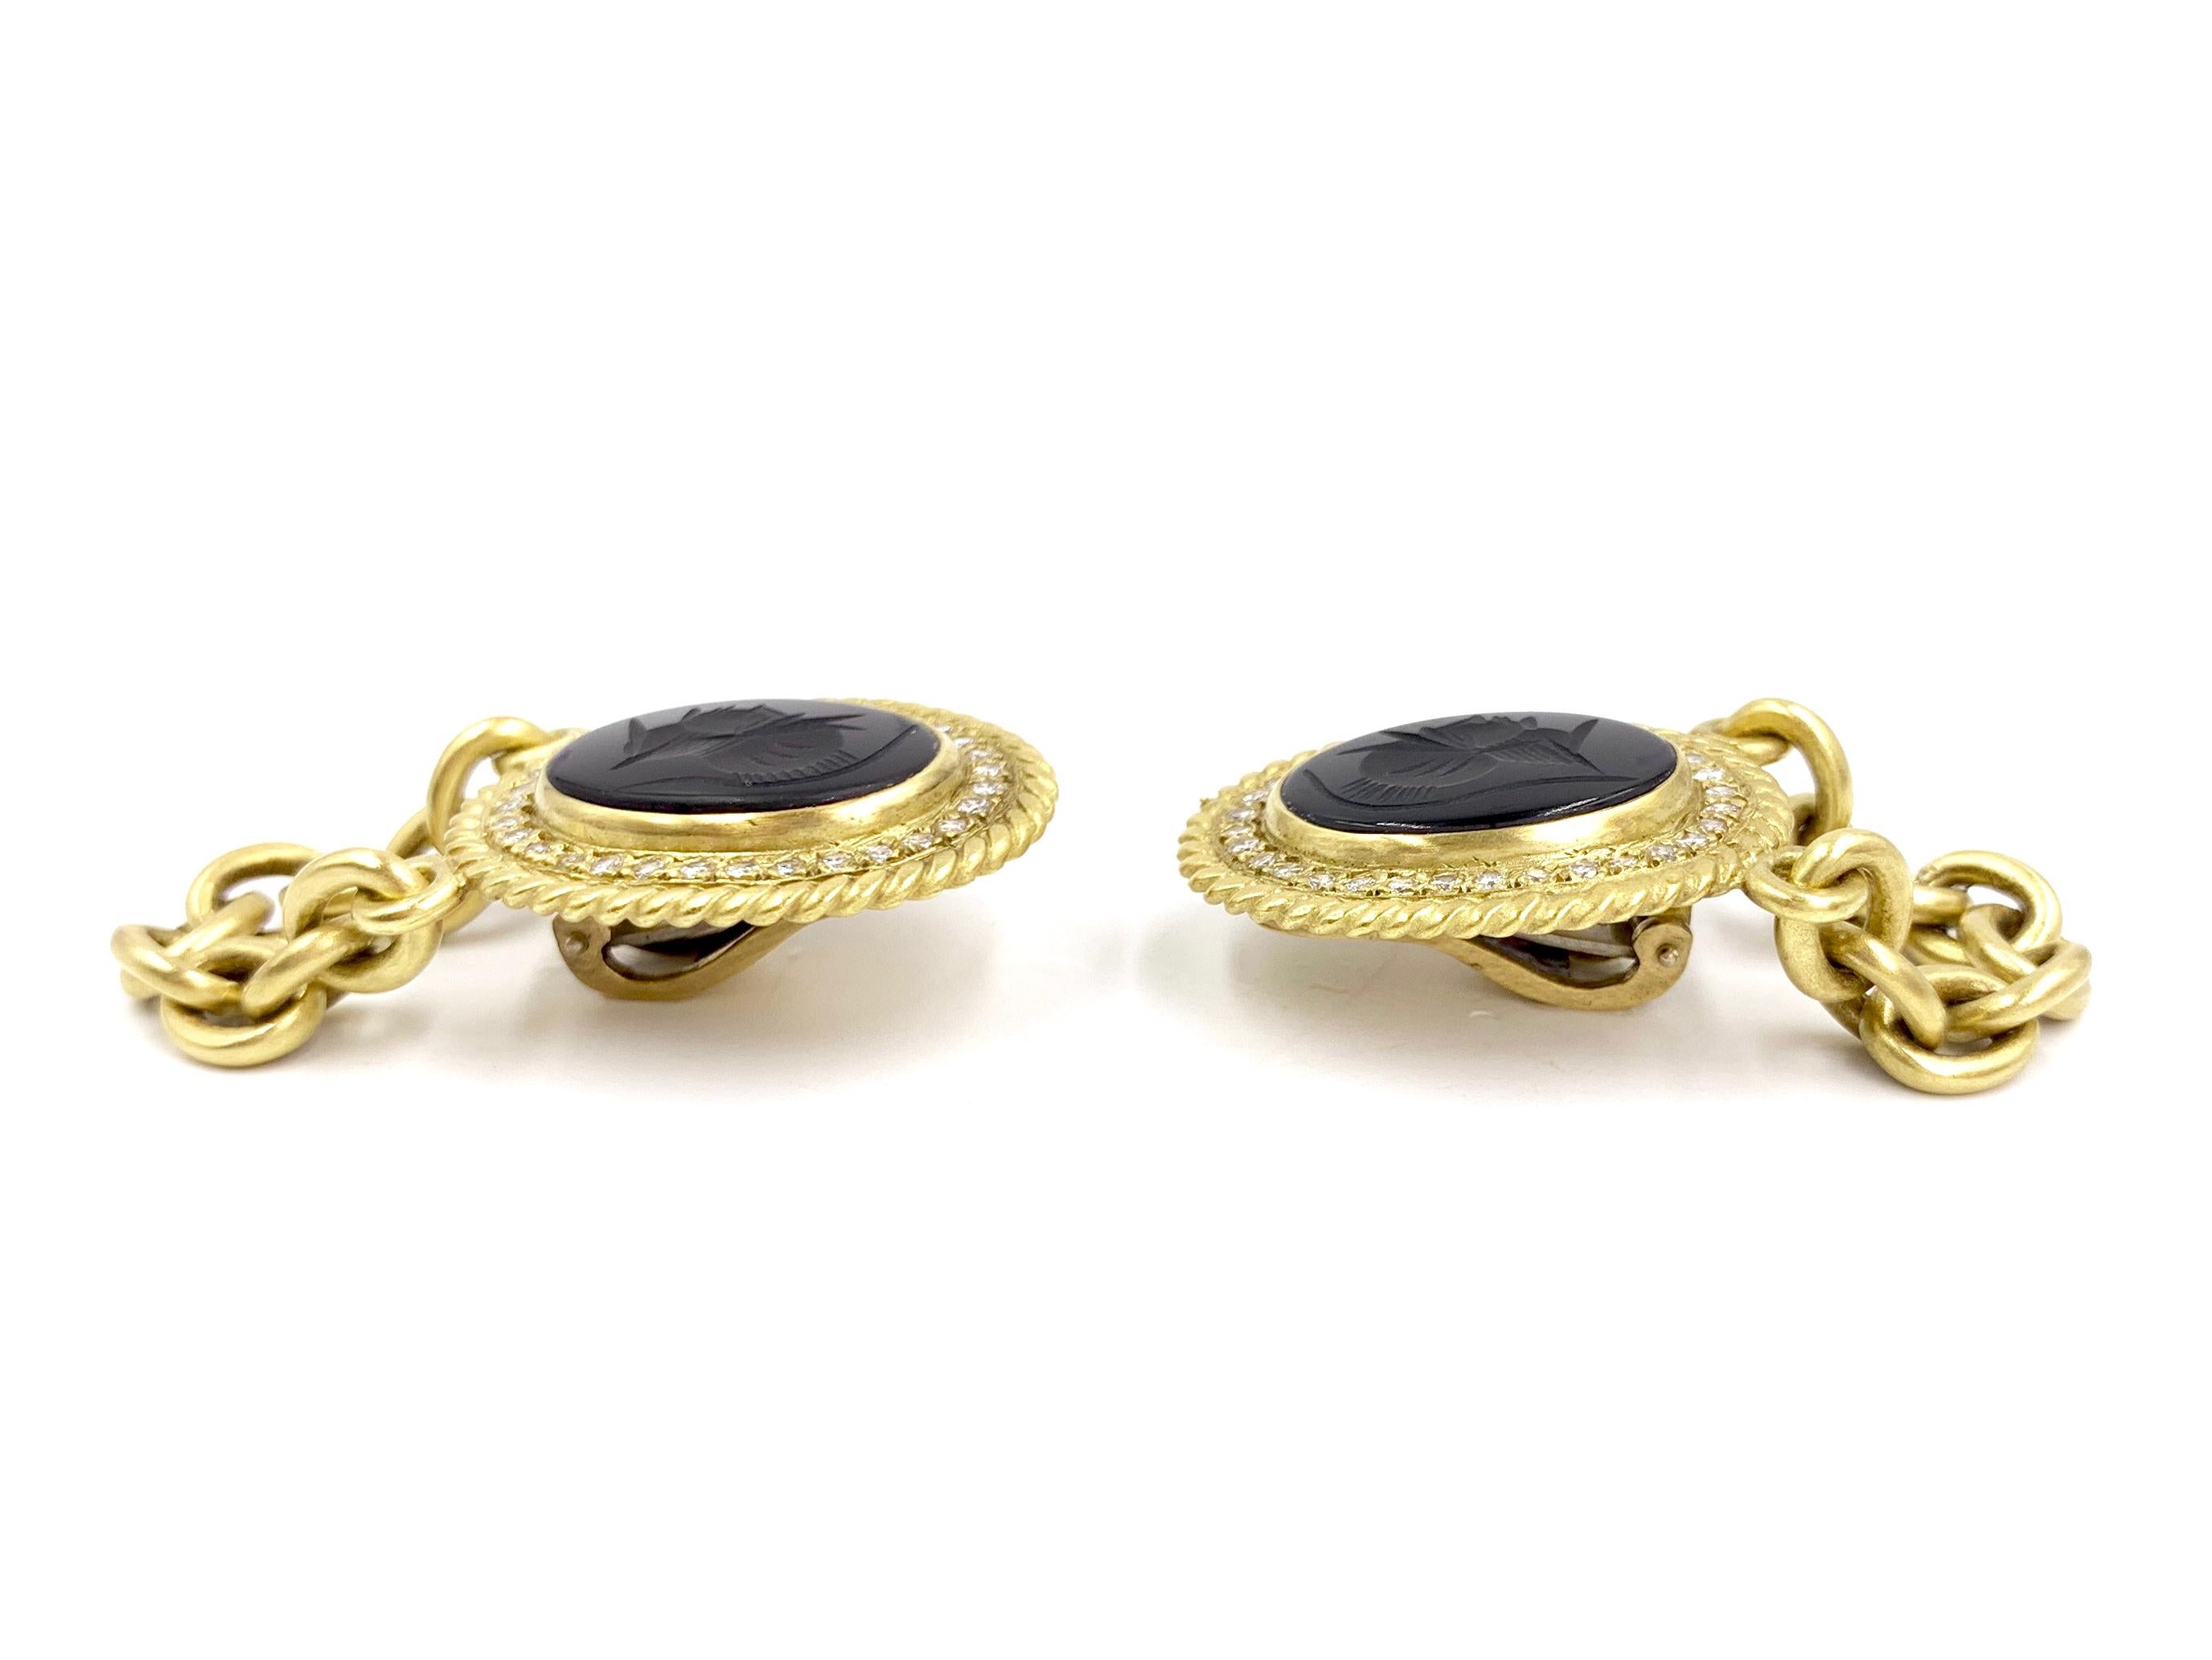 Fashionable brushed 18 karat yellow gold chain drop earrings featuring onyx with intaglio soldier profile surrounded by white diamonds. Earrings have a diamond total weight of .96 carats at approximately F-G color, VS2 clarity. 
Earrings are fixed